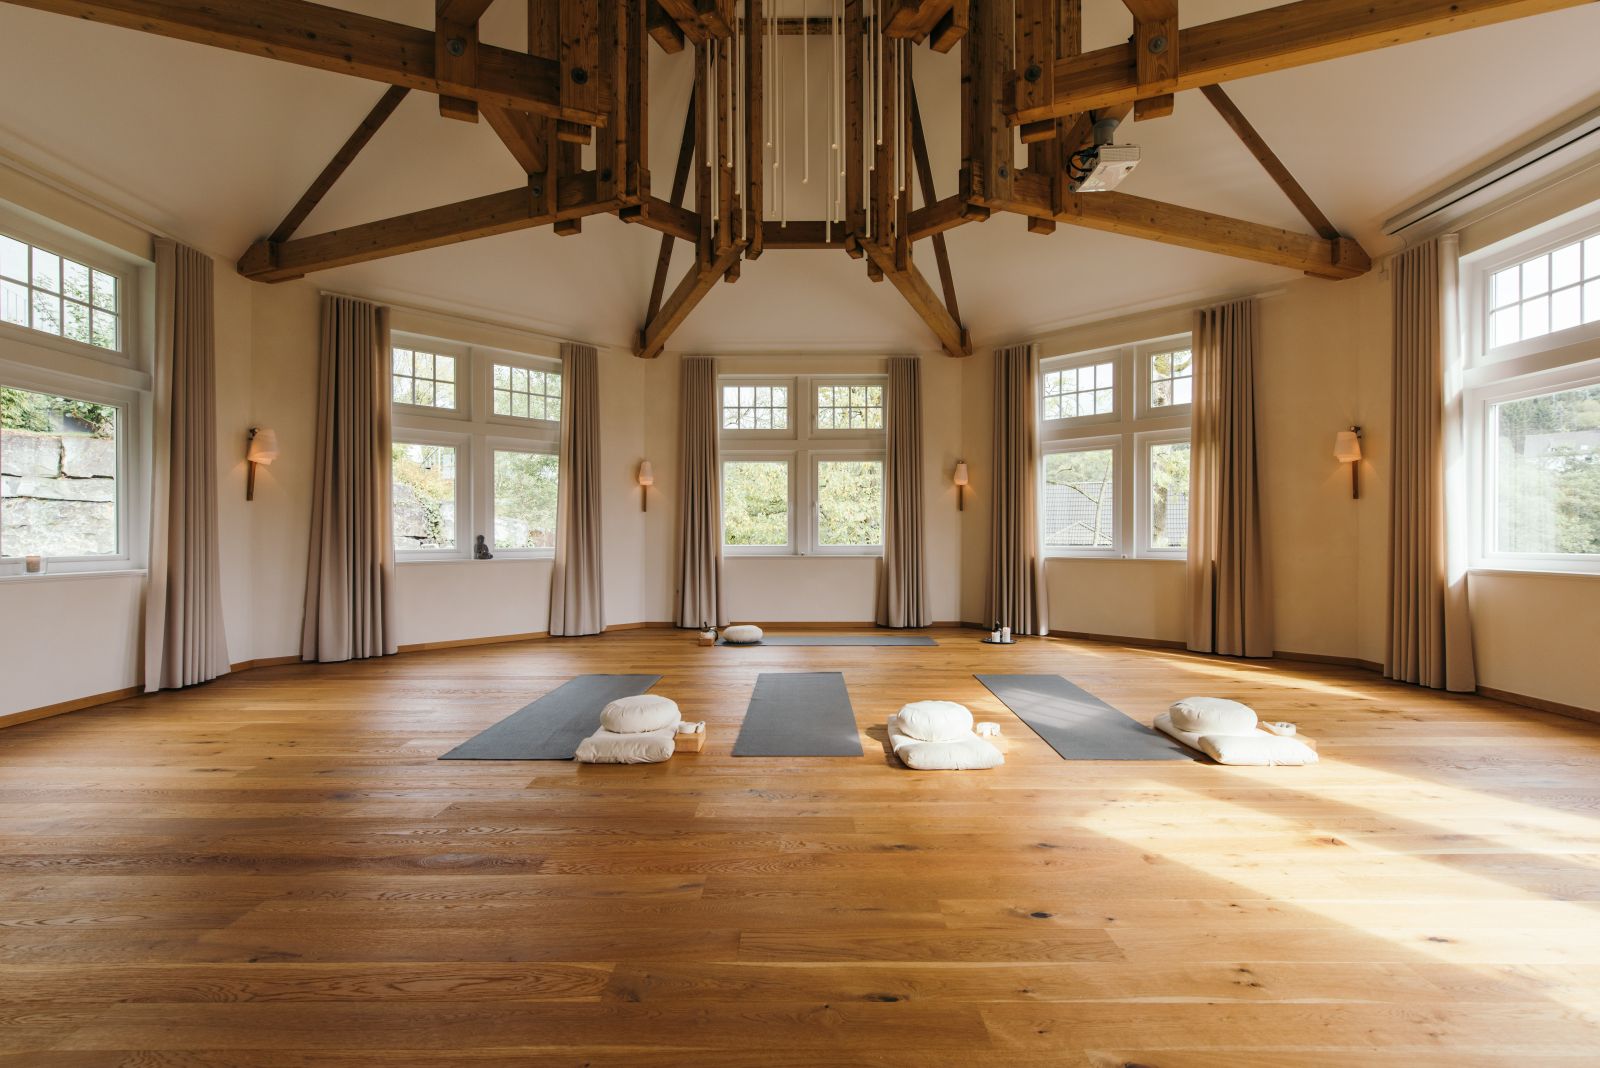 Yoga room with centres and cushions